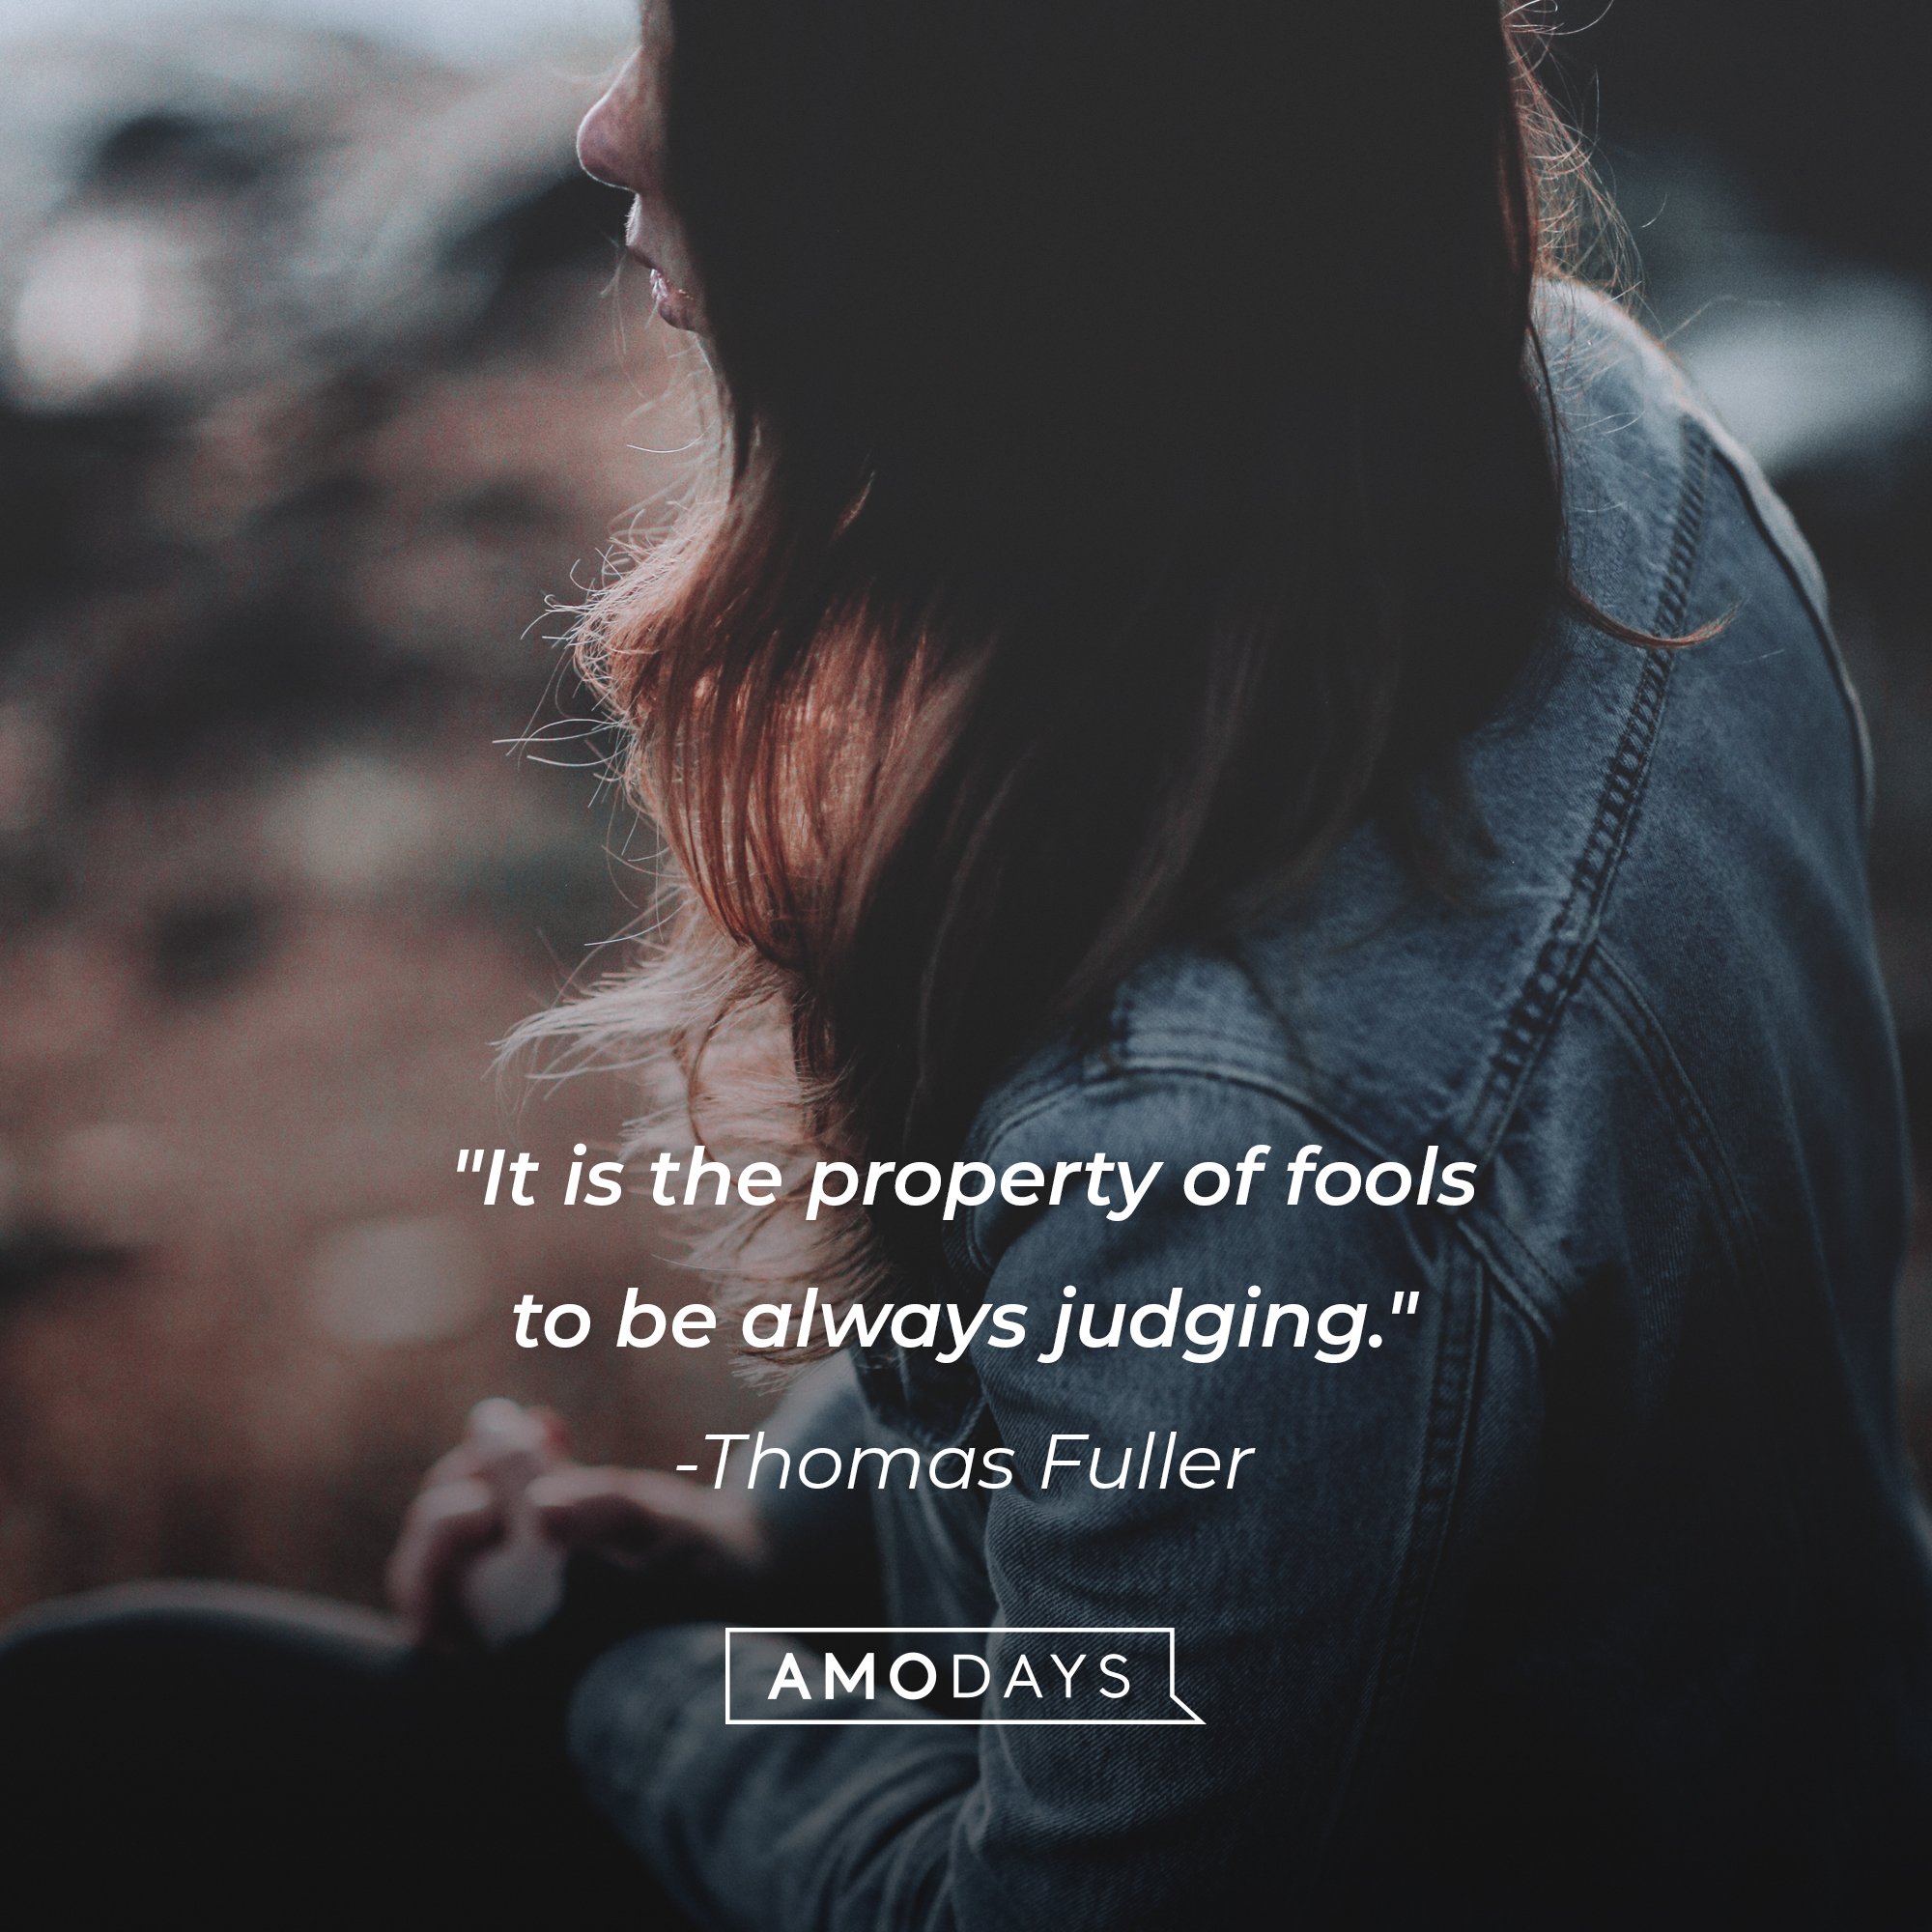 Thomas Fuller’s quote: "It is the property of fools to be always judging." | Image: AmoDays